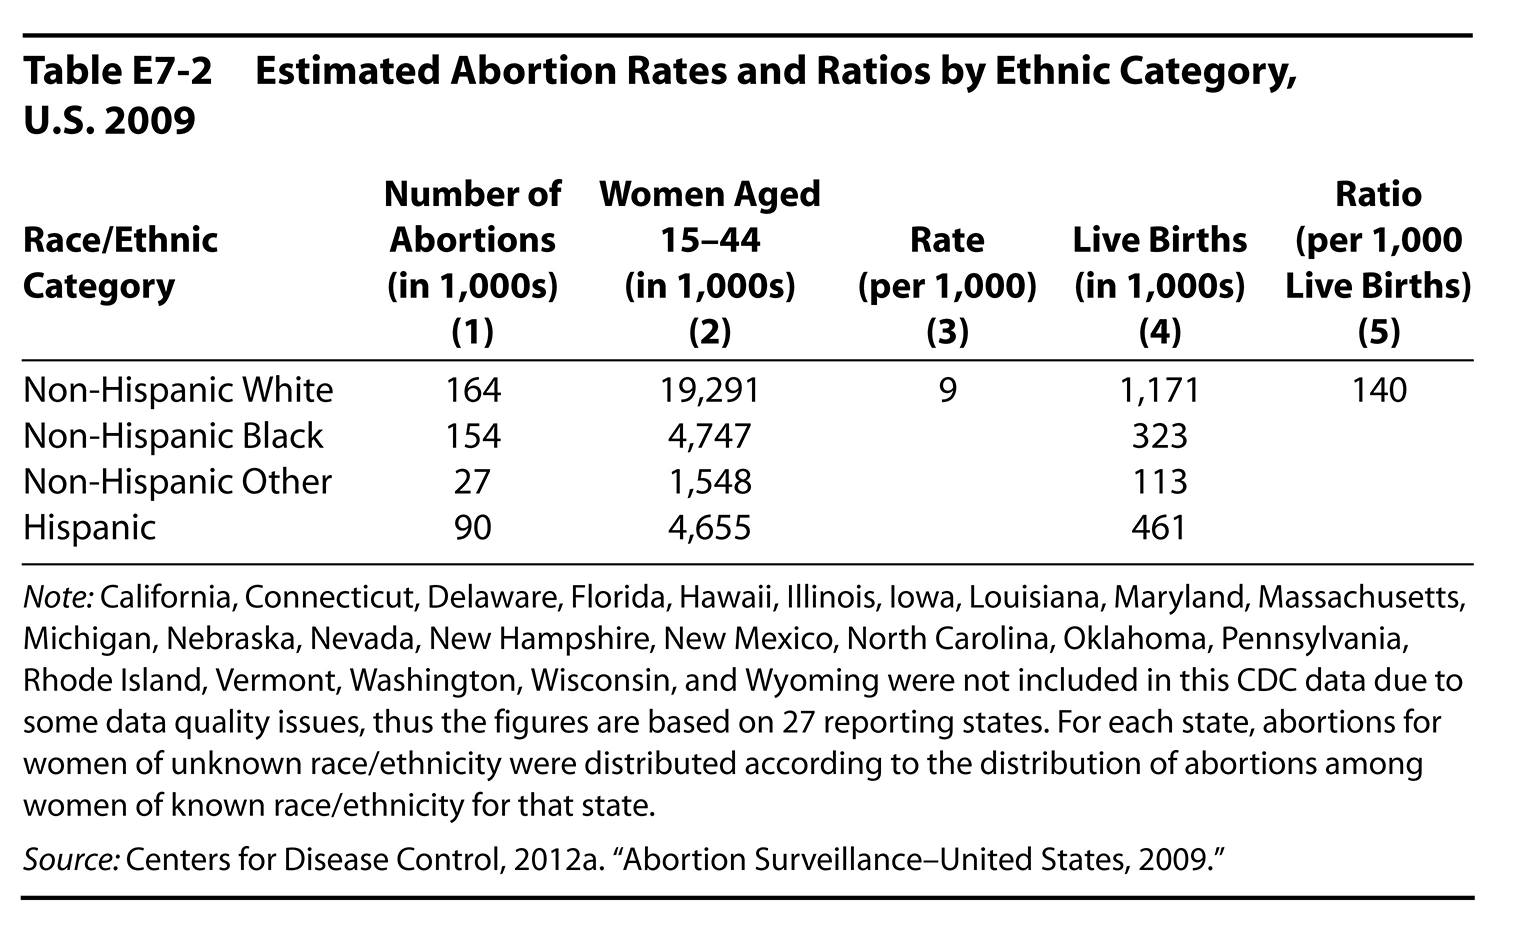 Table E7-2 Estimated Abortion Rates and Ratios by Ethnic Category, U.S. 2009